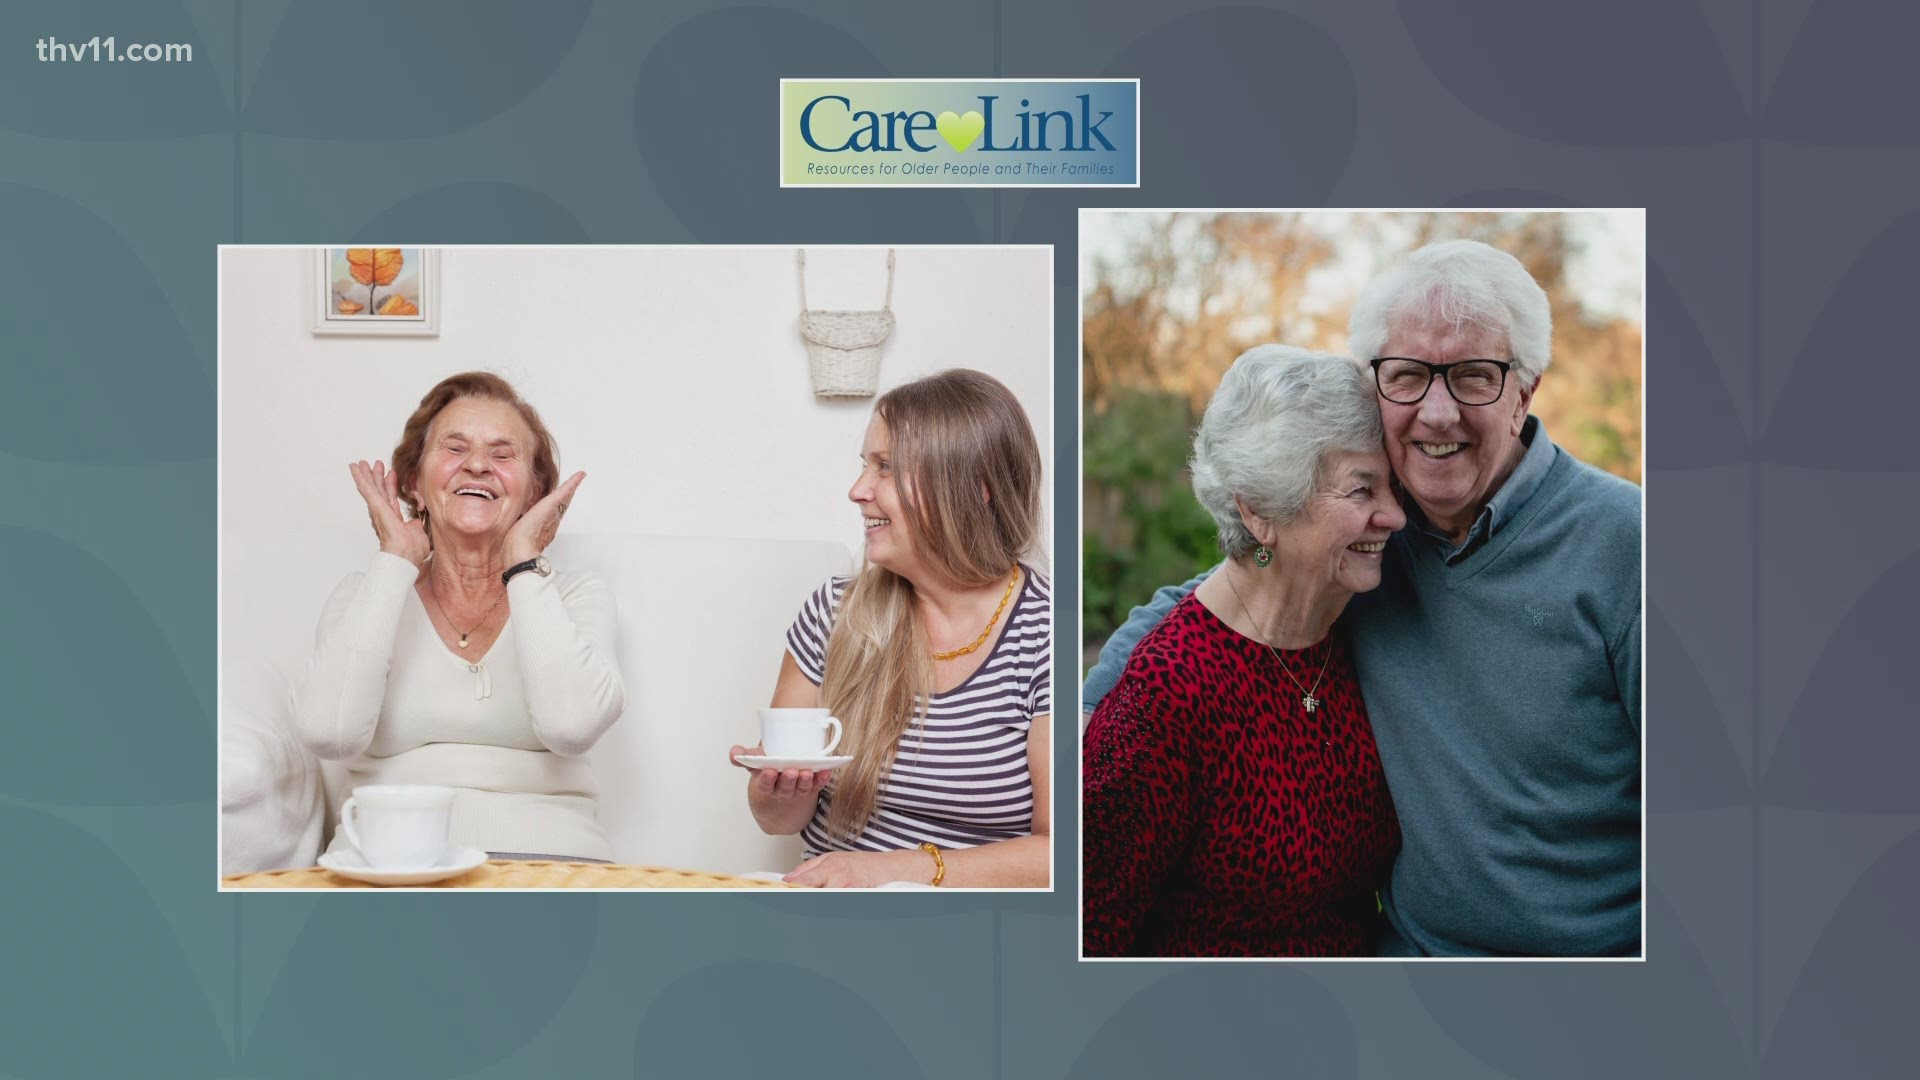 CareLink is a nonprofit organization that provides resources for older people and their families in Central Arkansas.